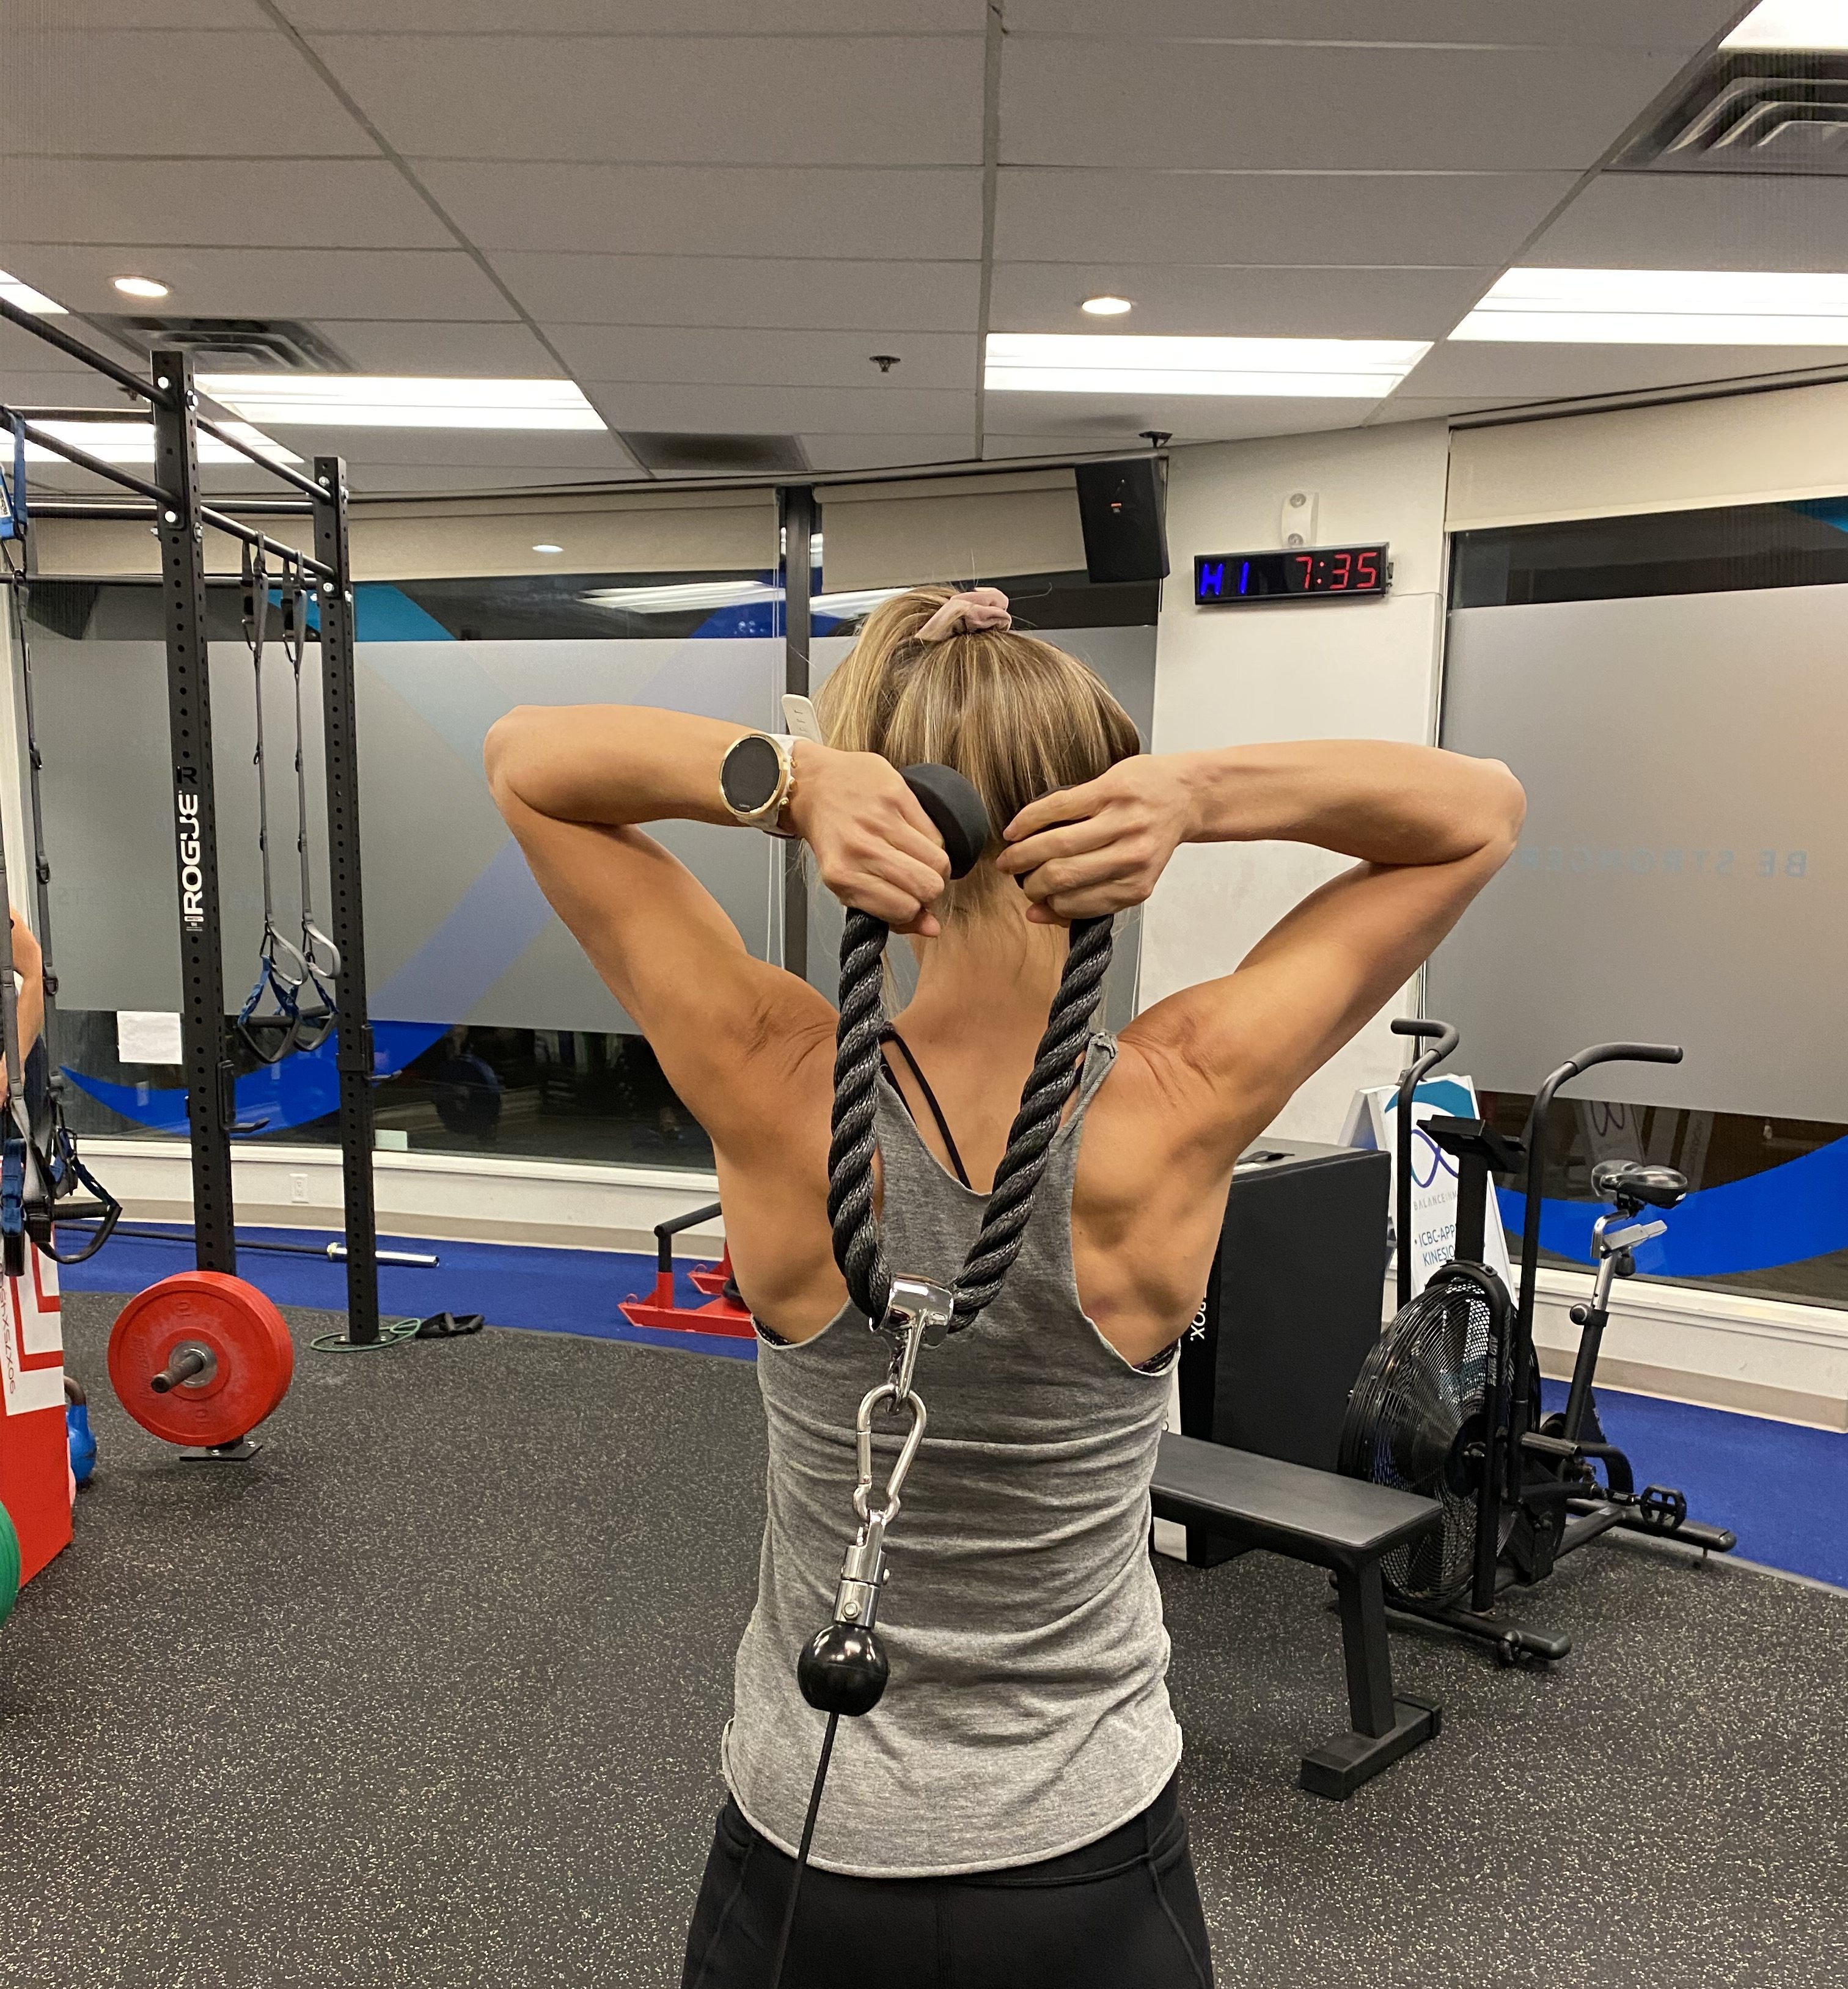 BIM Lab: 3 Exercises for the Tricep Muscles